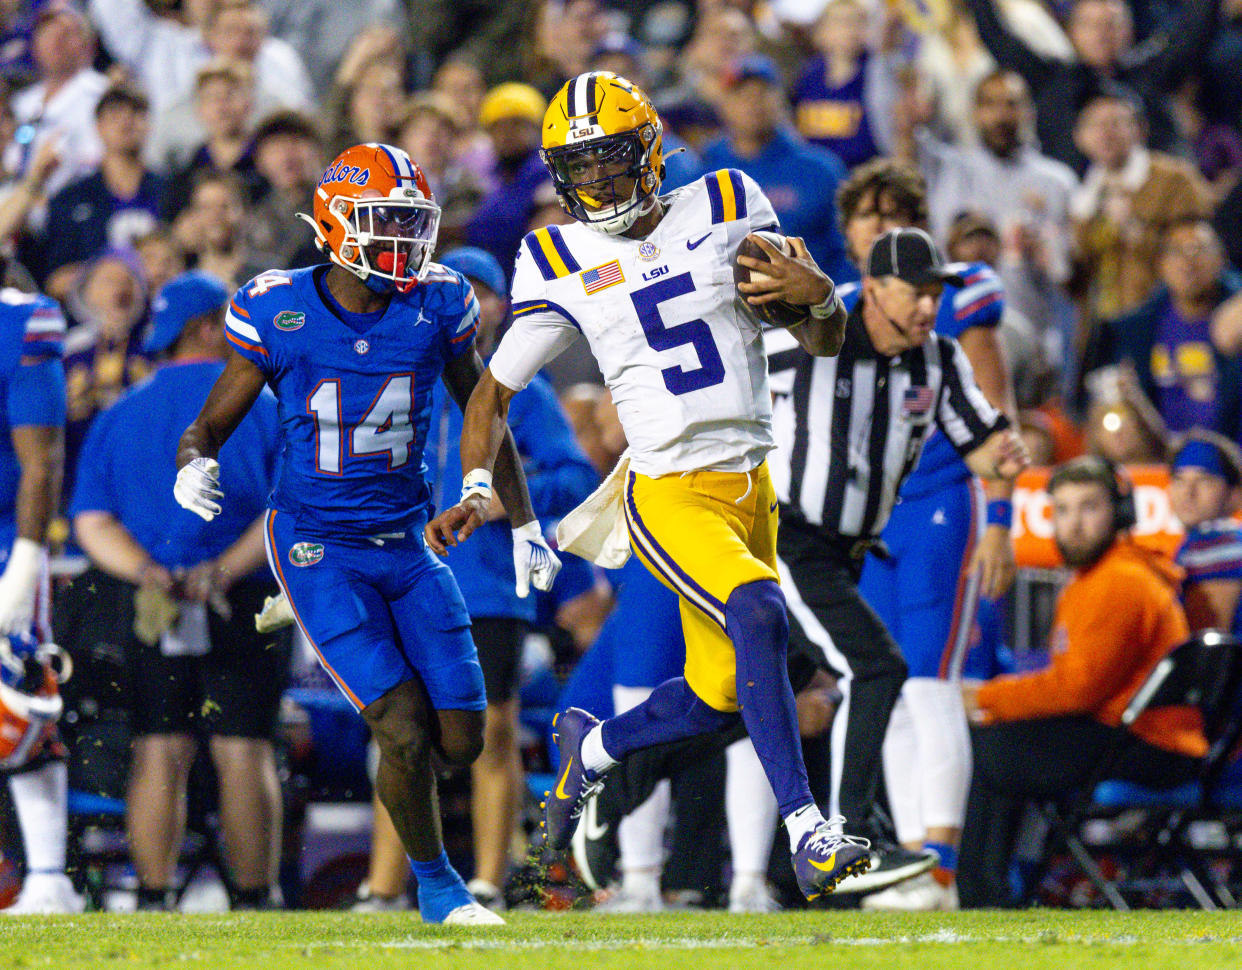 LSU Tigers quarterback Jayden Daniels (5) rushes for a touchdown against Florida Gators safety Jordan Castell (14) during the first half at Tiger Stadium.